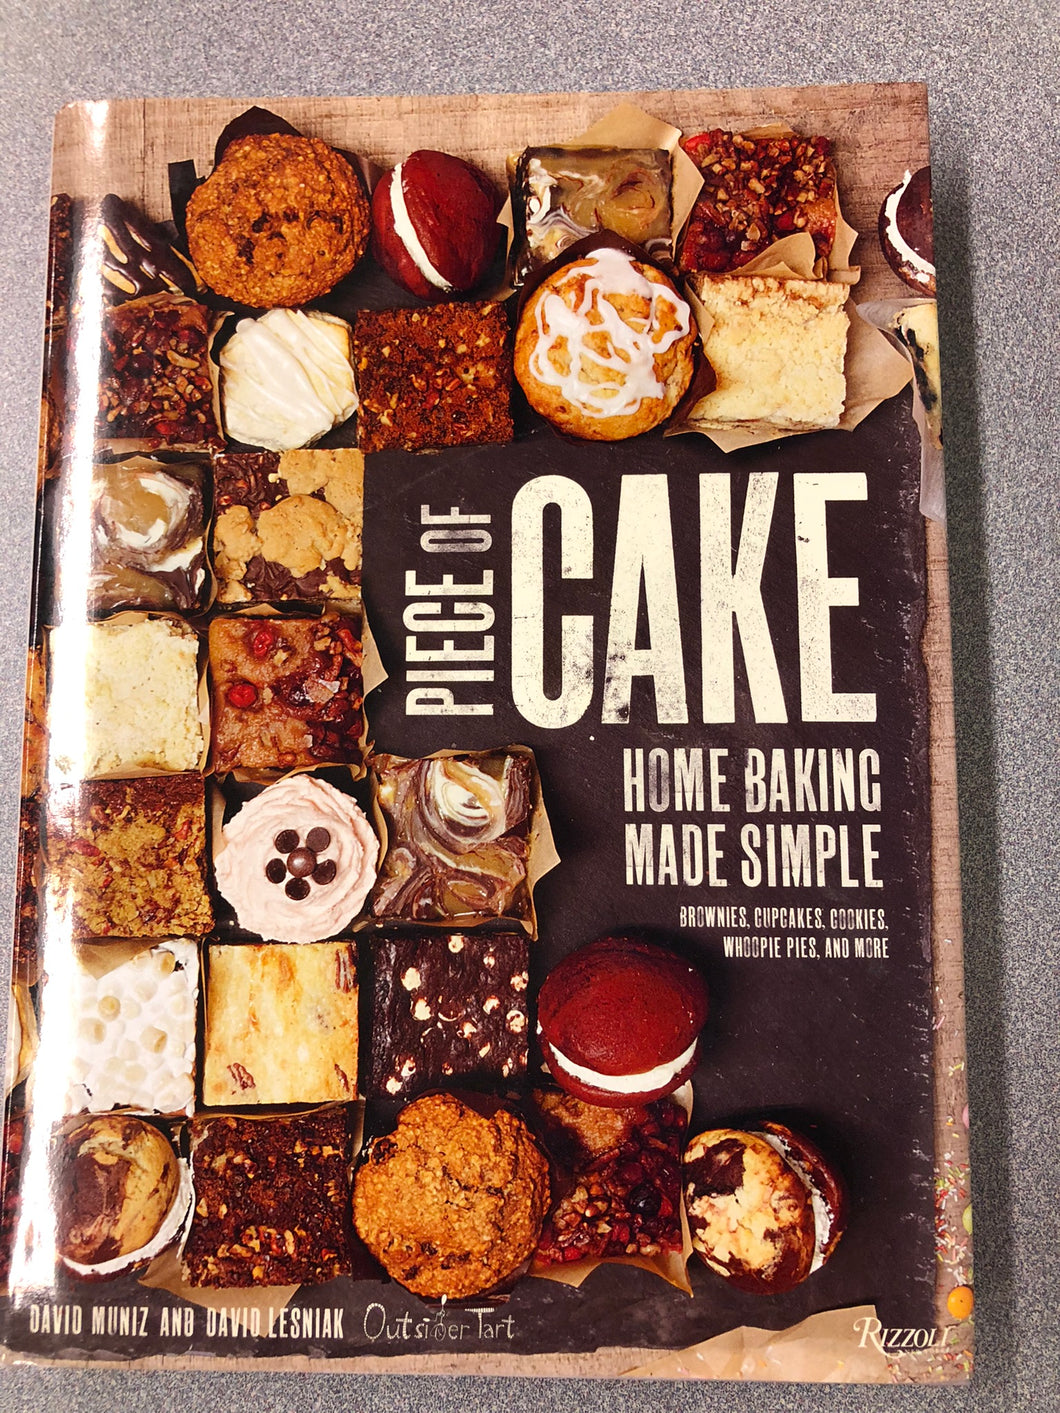 Piece of Cake: Home Baking Made Simple: Brownies, Cupcakes, Cookies, Whoopie Pies, and More, Muniz, David and David Lesniak [2011] CO 9/22